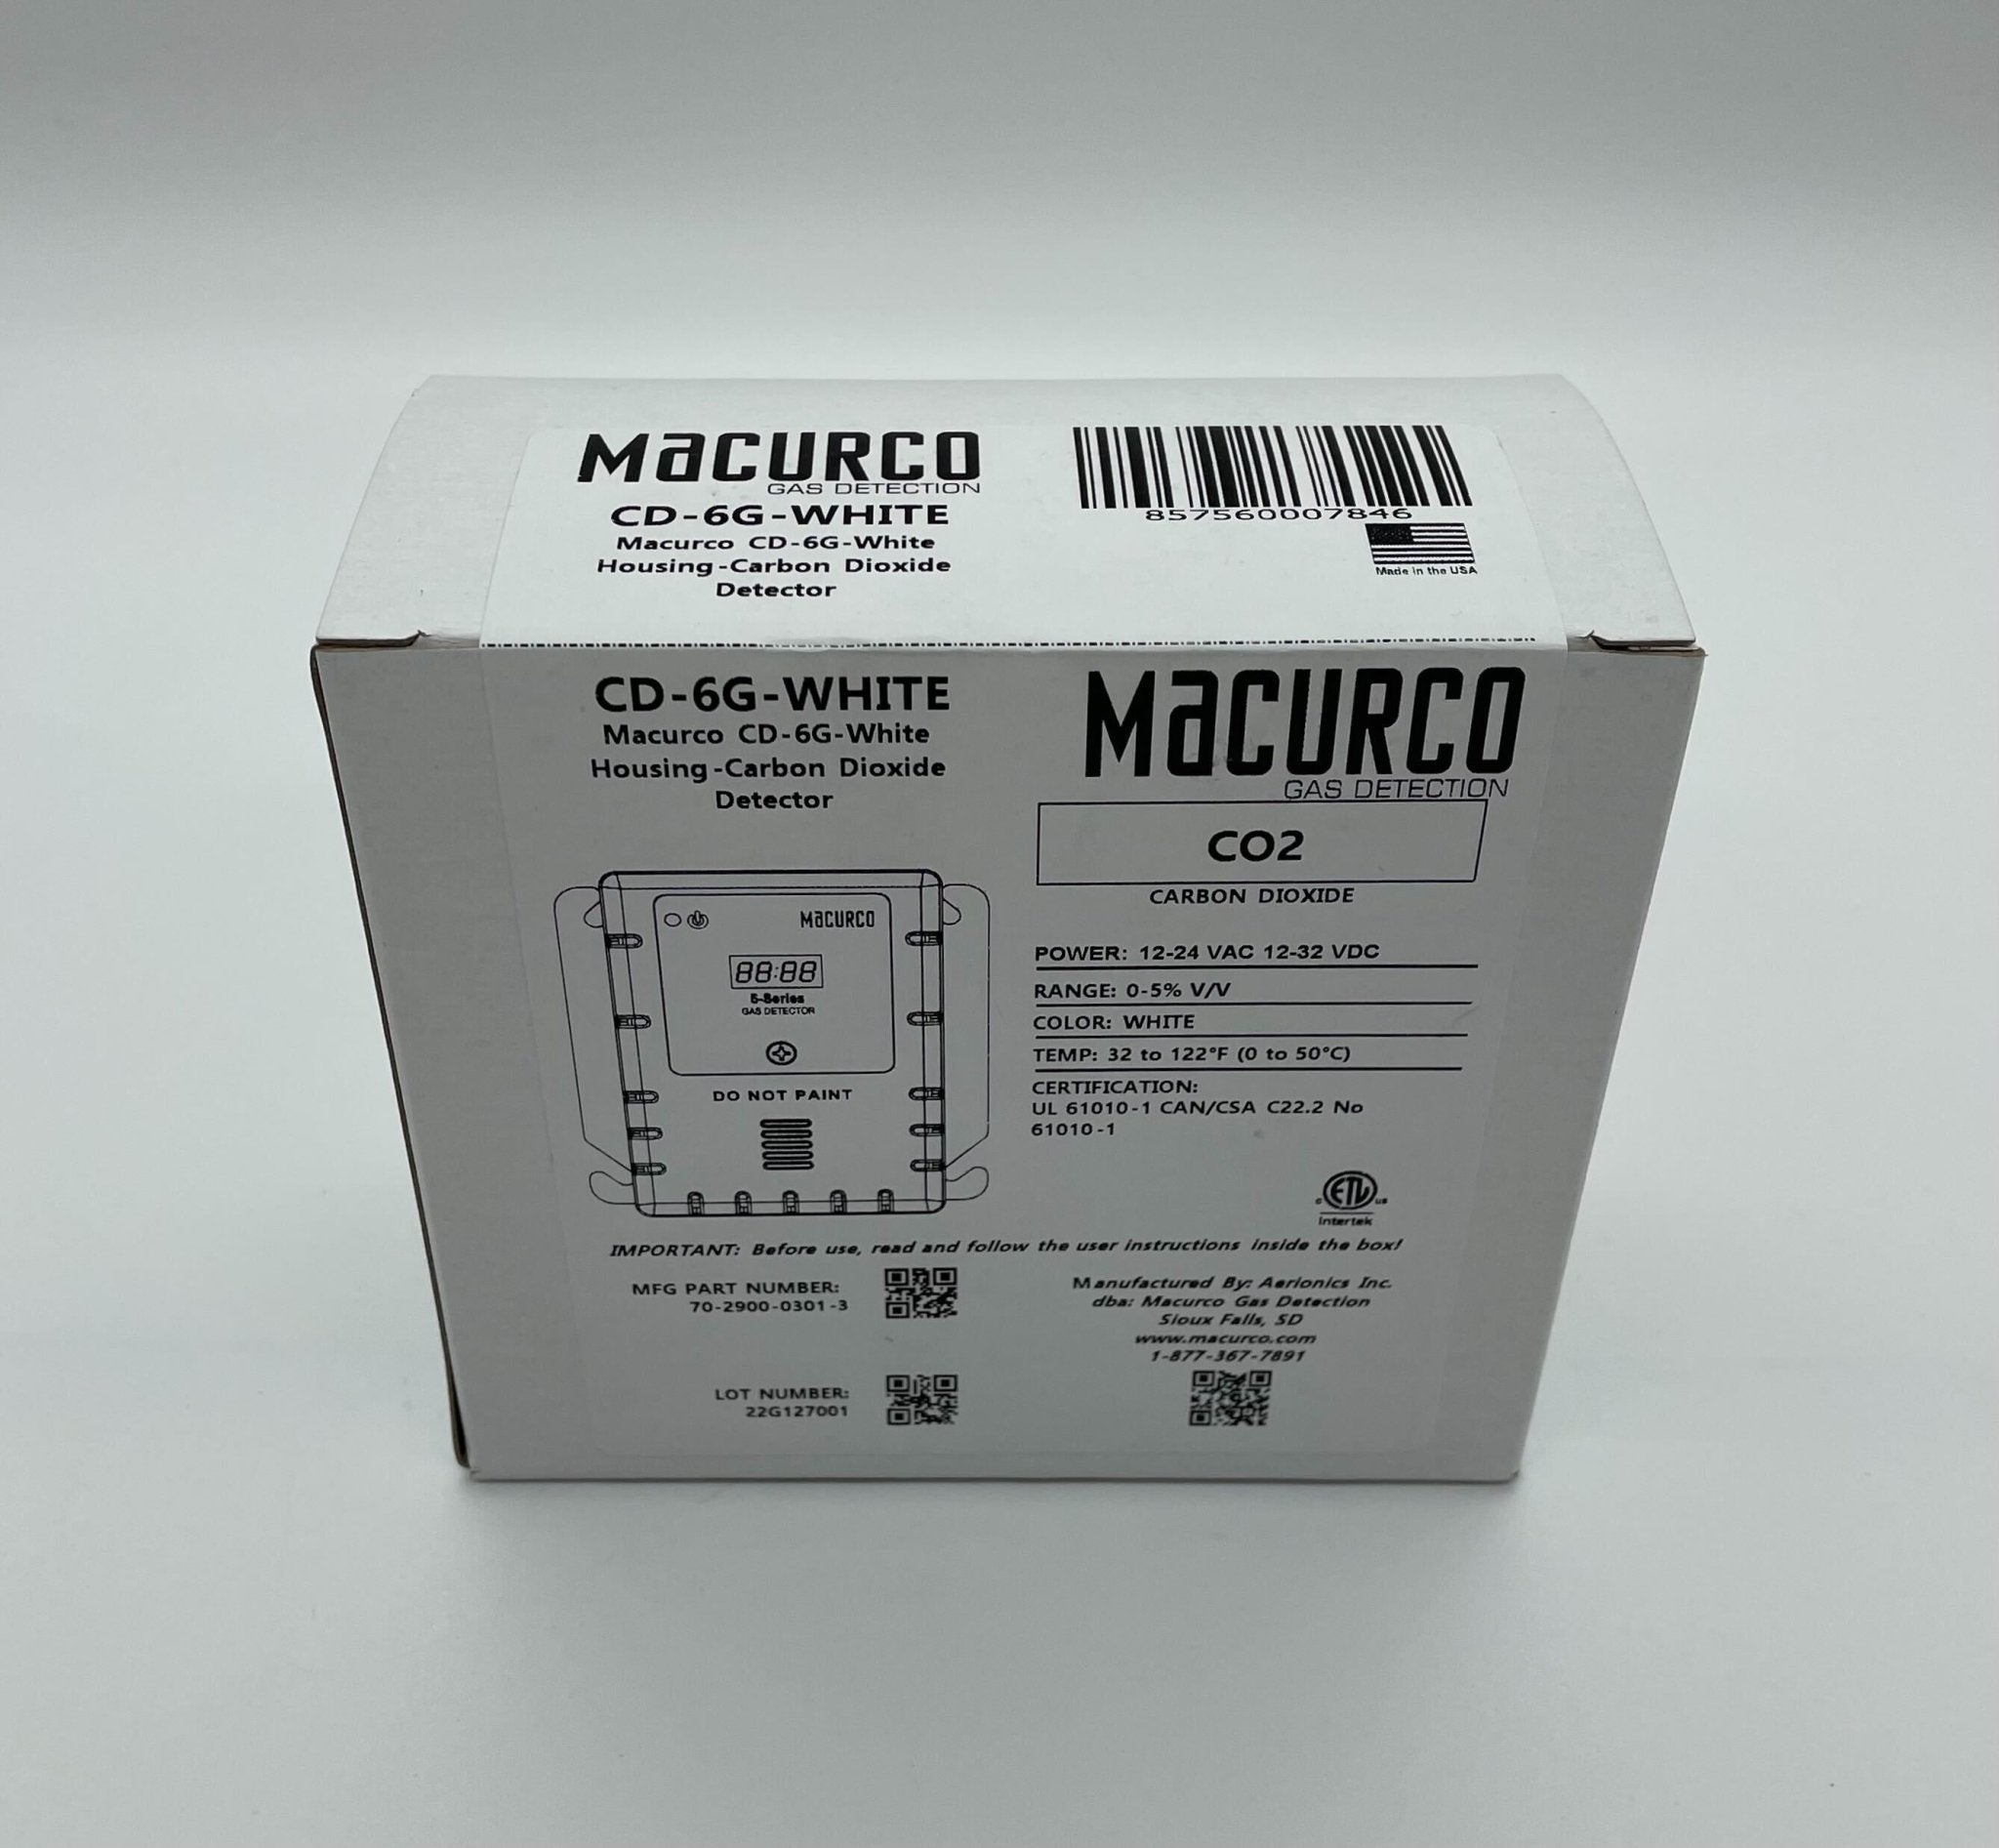 Macurco CD-6G - The Fire Alarm Supplier